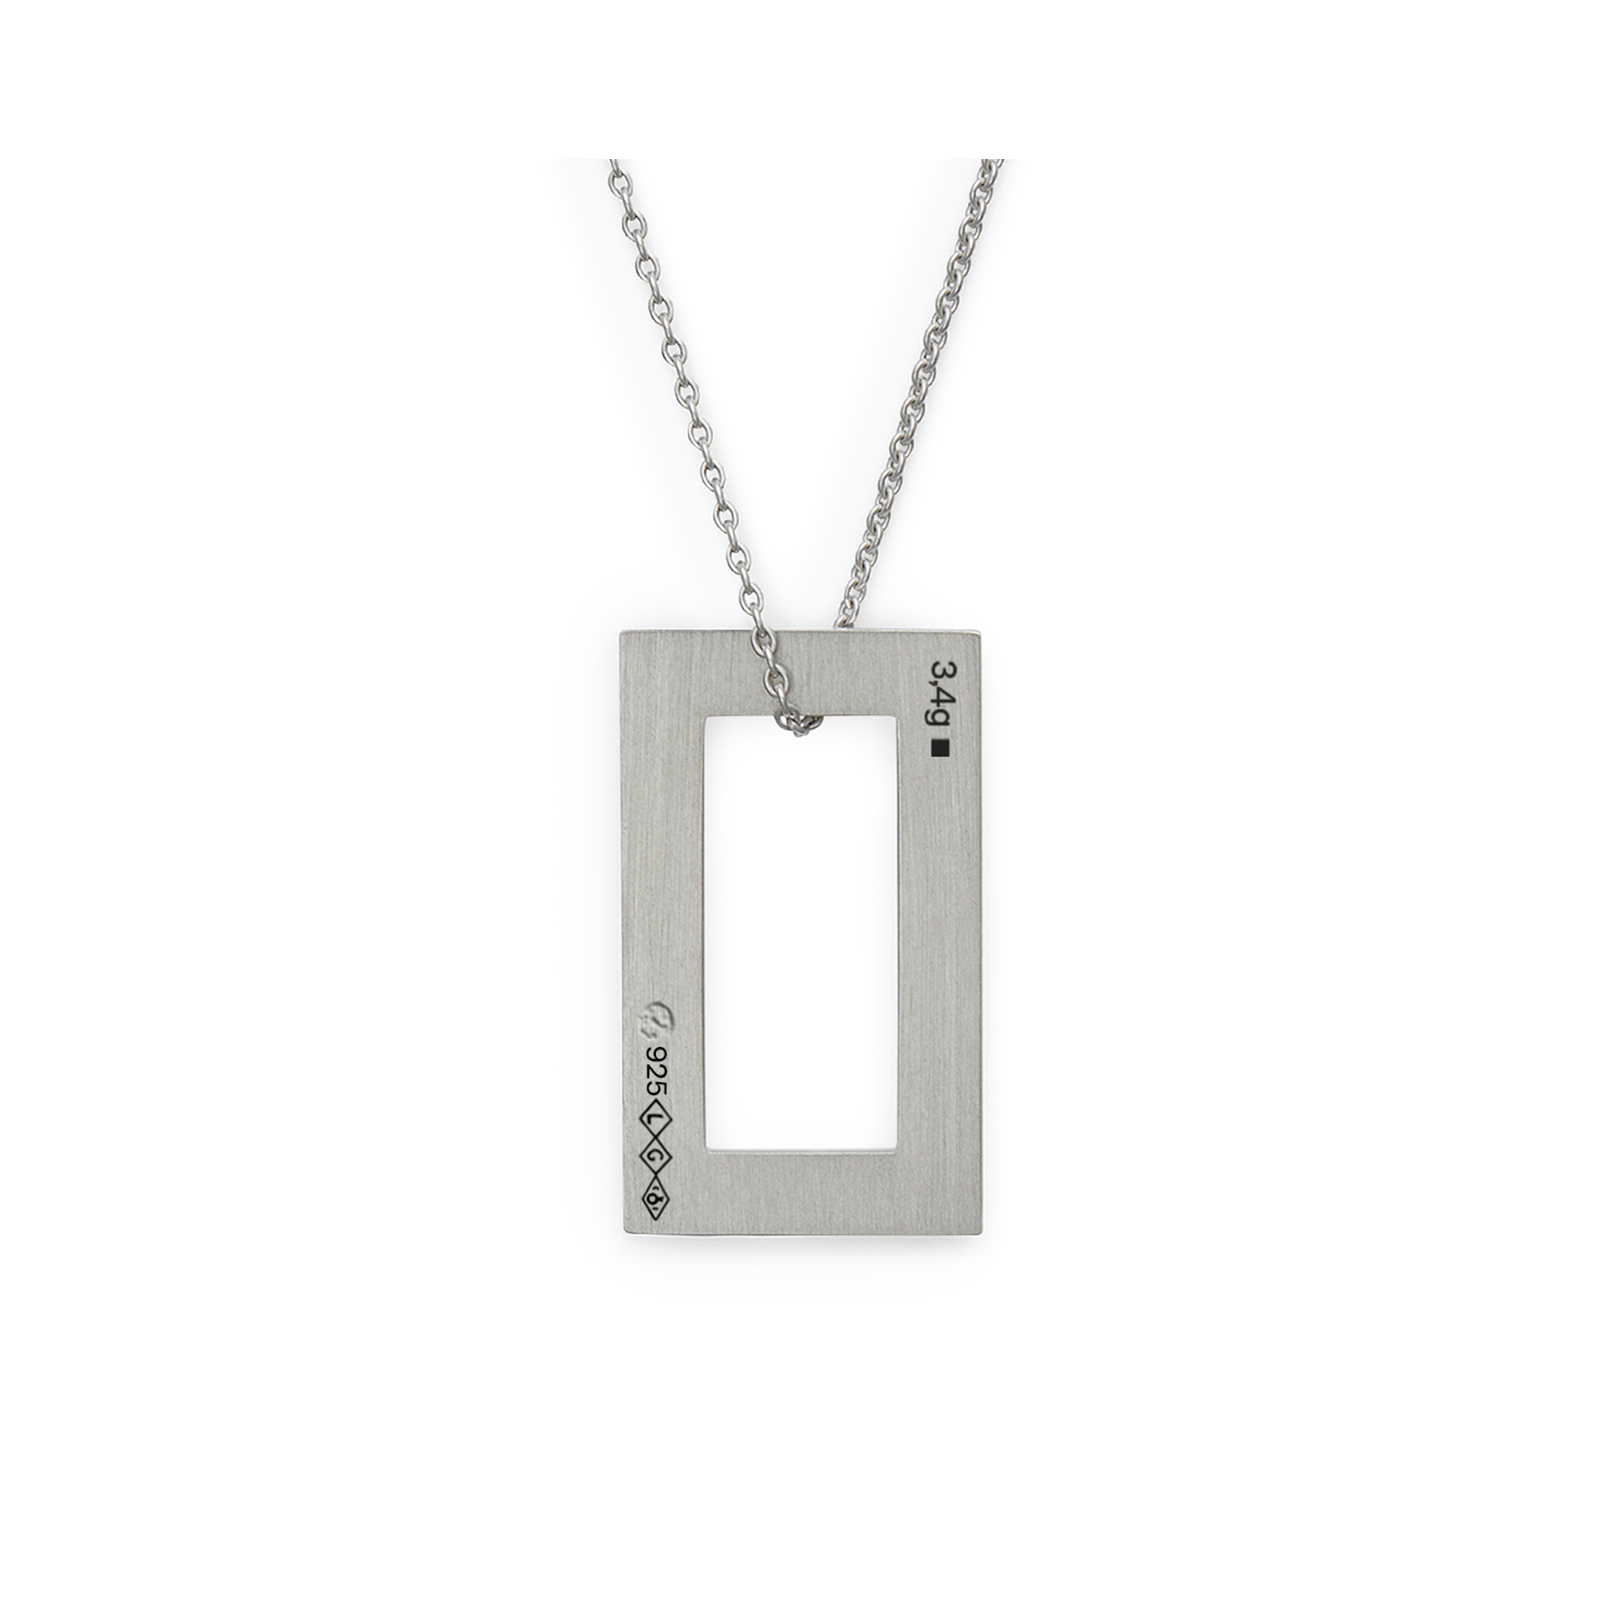 3.4g rectangle pendant with a chain